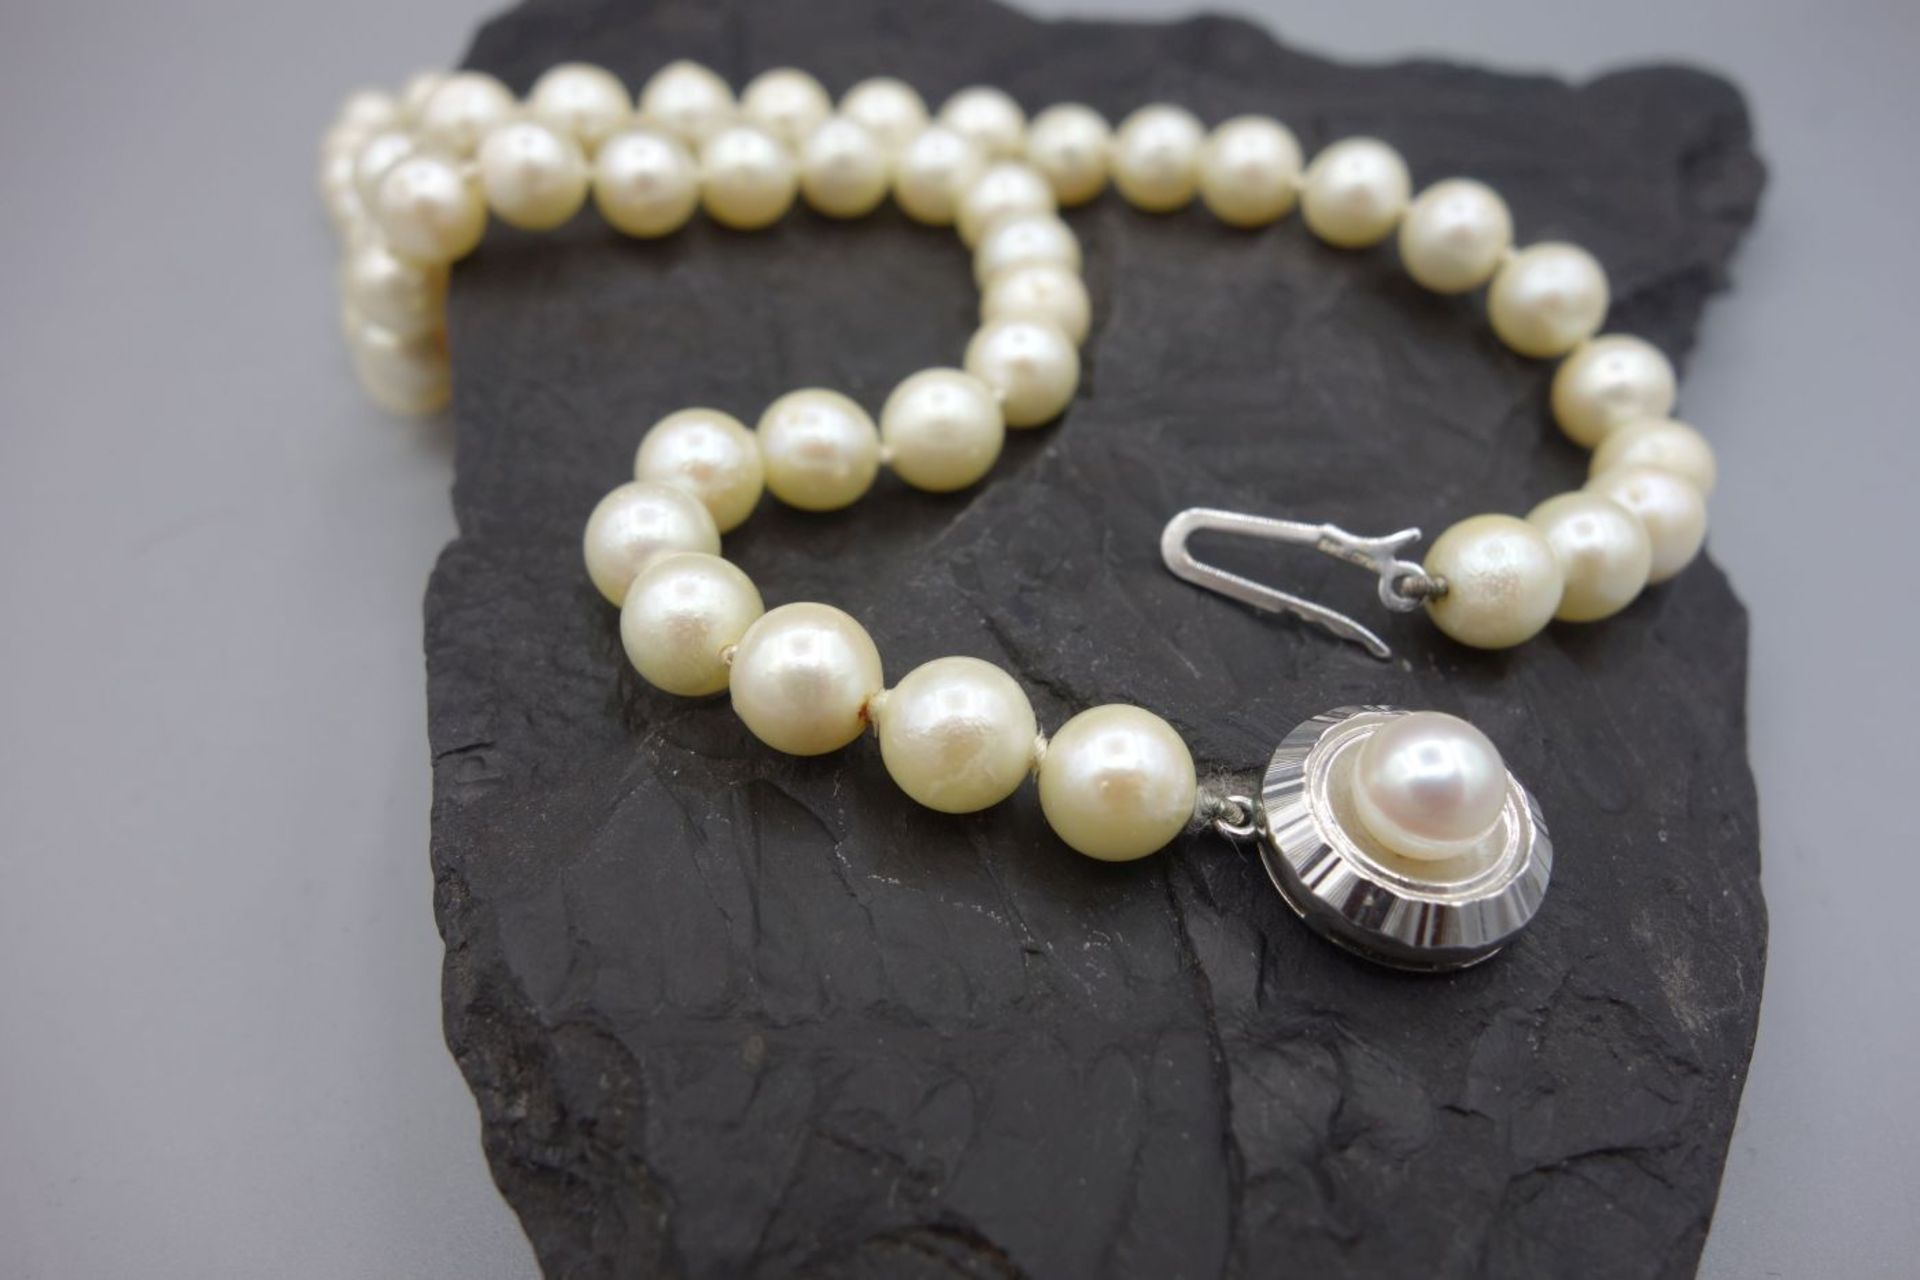 Pearl necklace - Image 5 of 5